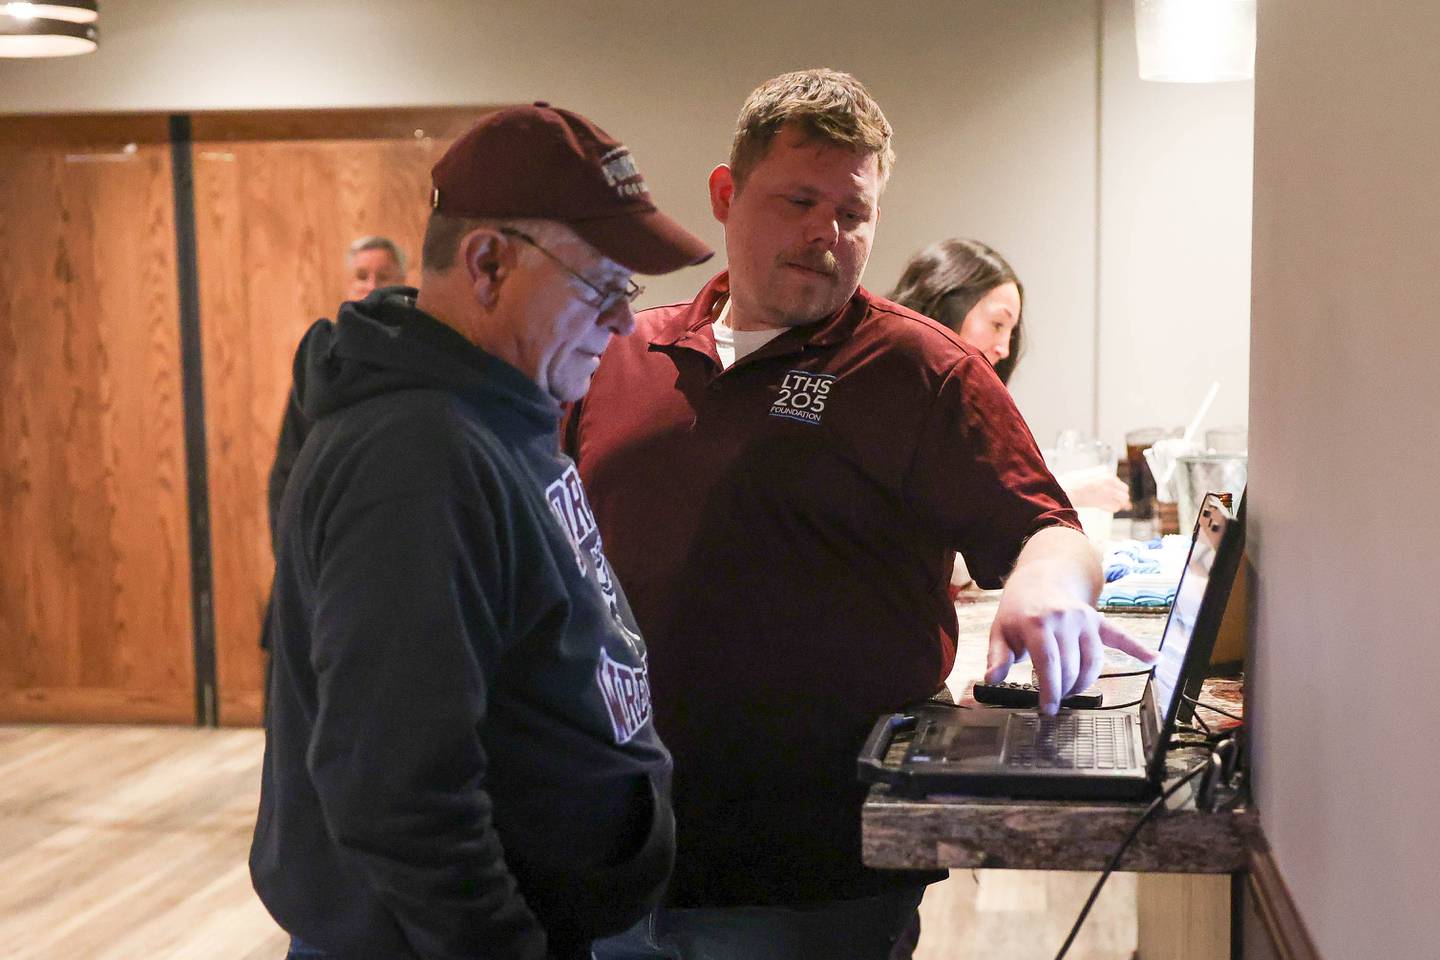 Lockport Township High School District 205 referendum committee members Rob Cromholm, left, at Tim Russ, look at the early vote results at a watch party at Coom’s Corner on Tuesday, March 19 in Lockport.